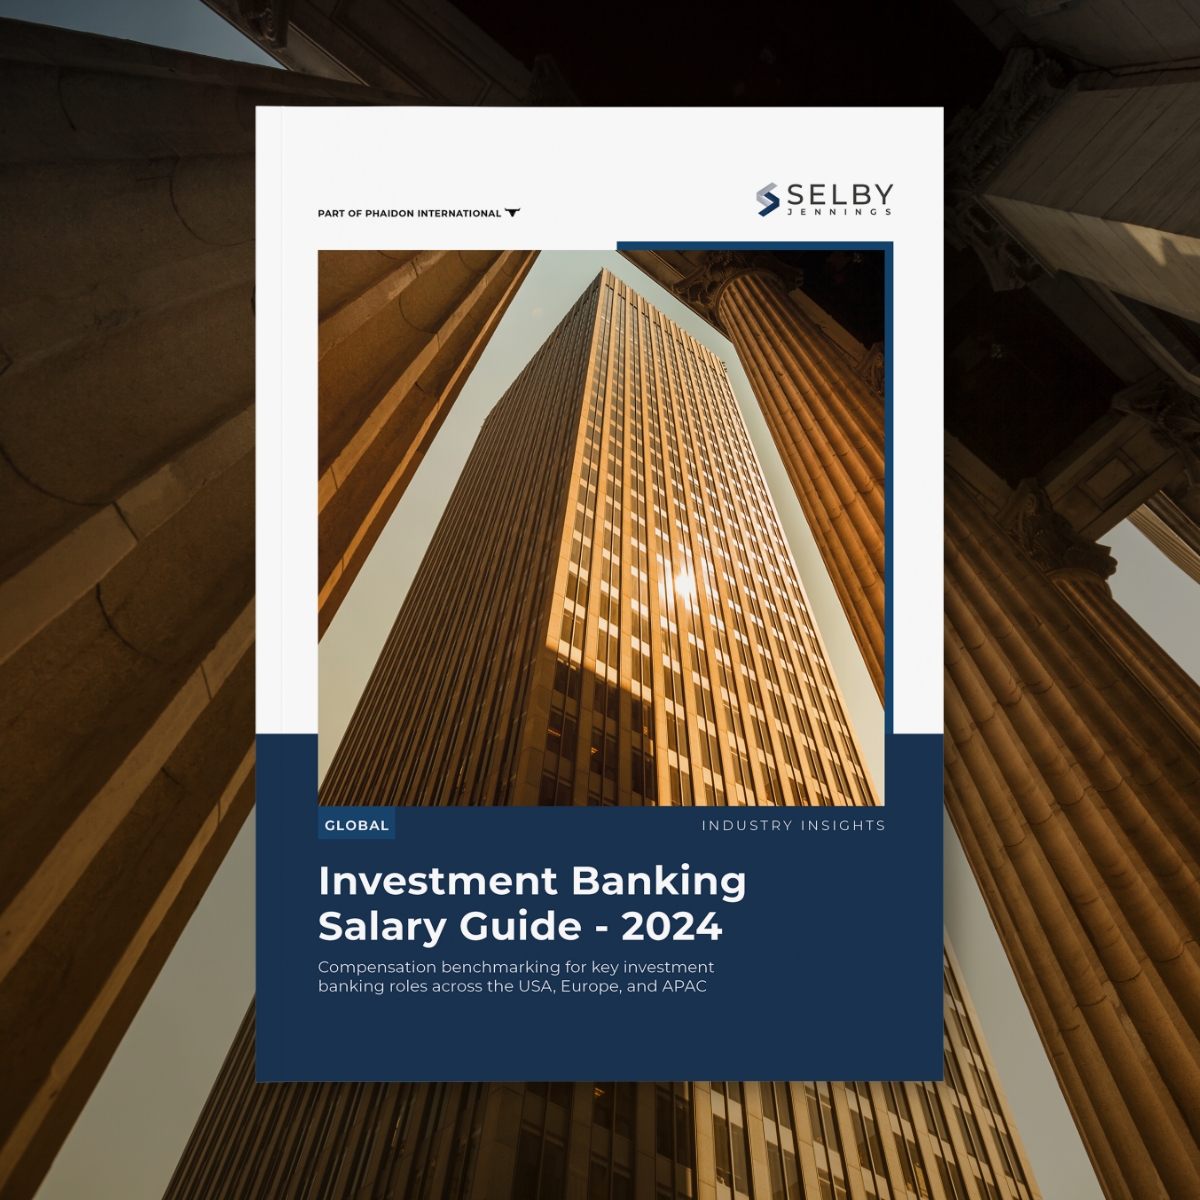 Singapore Investment Banking Salary Guide - 2024 Image